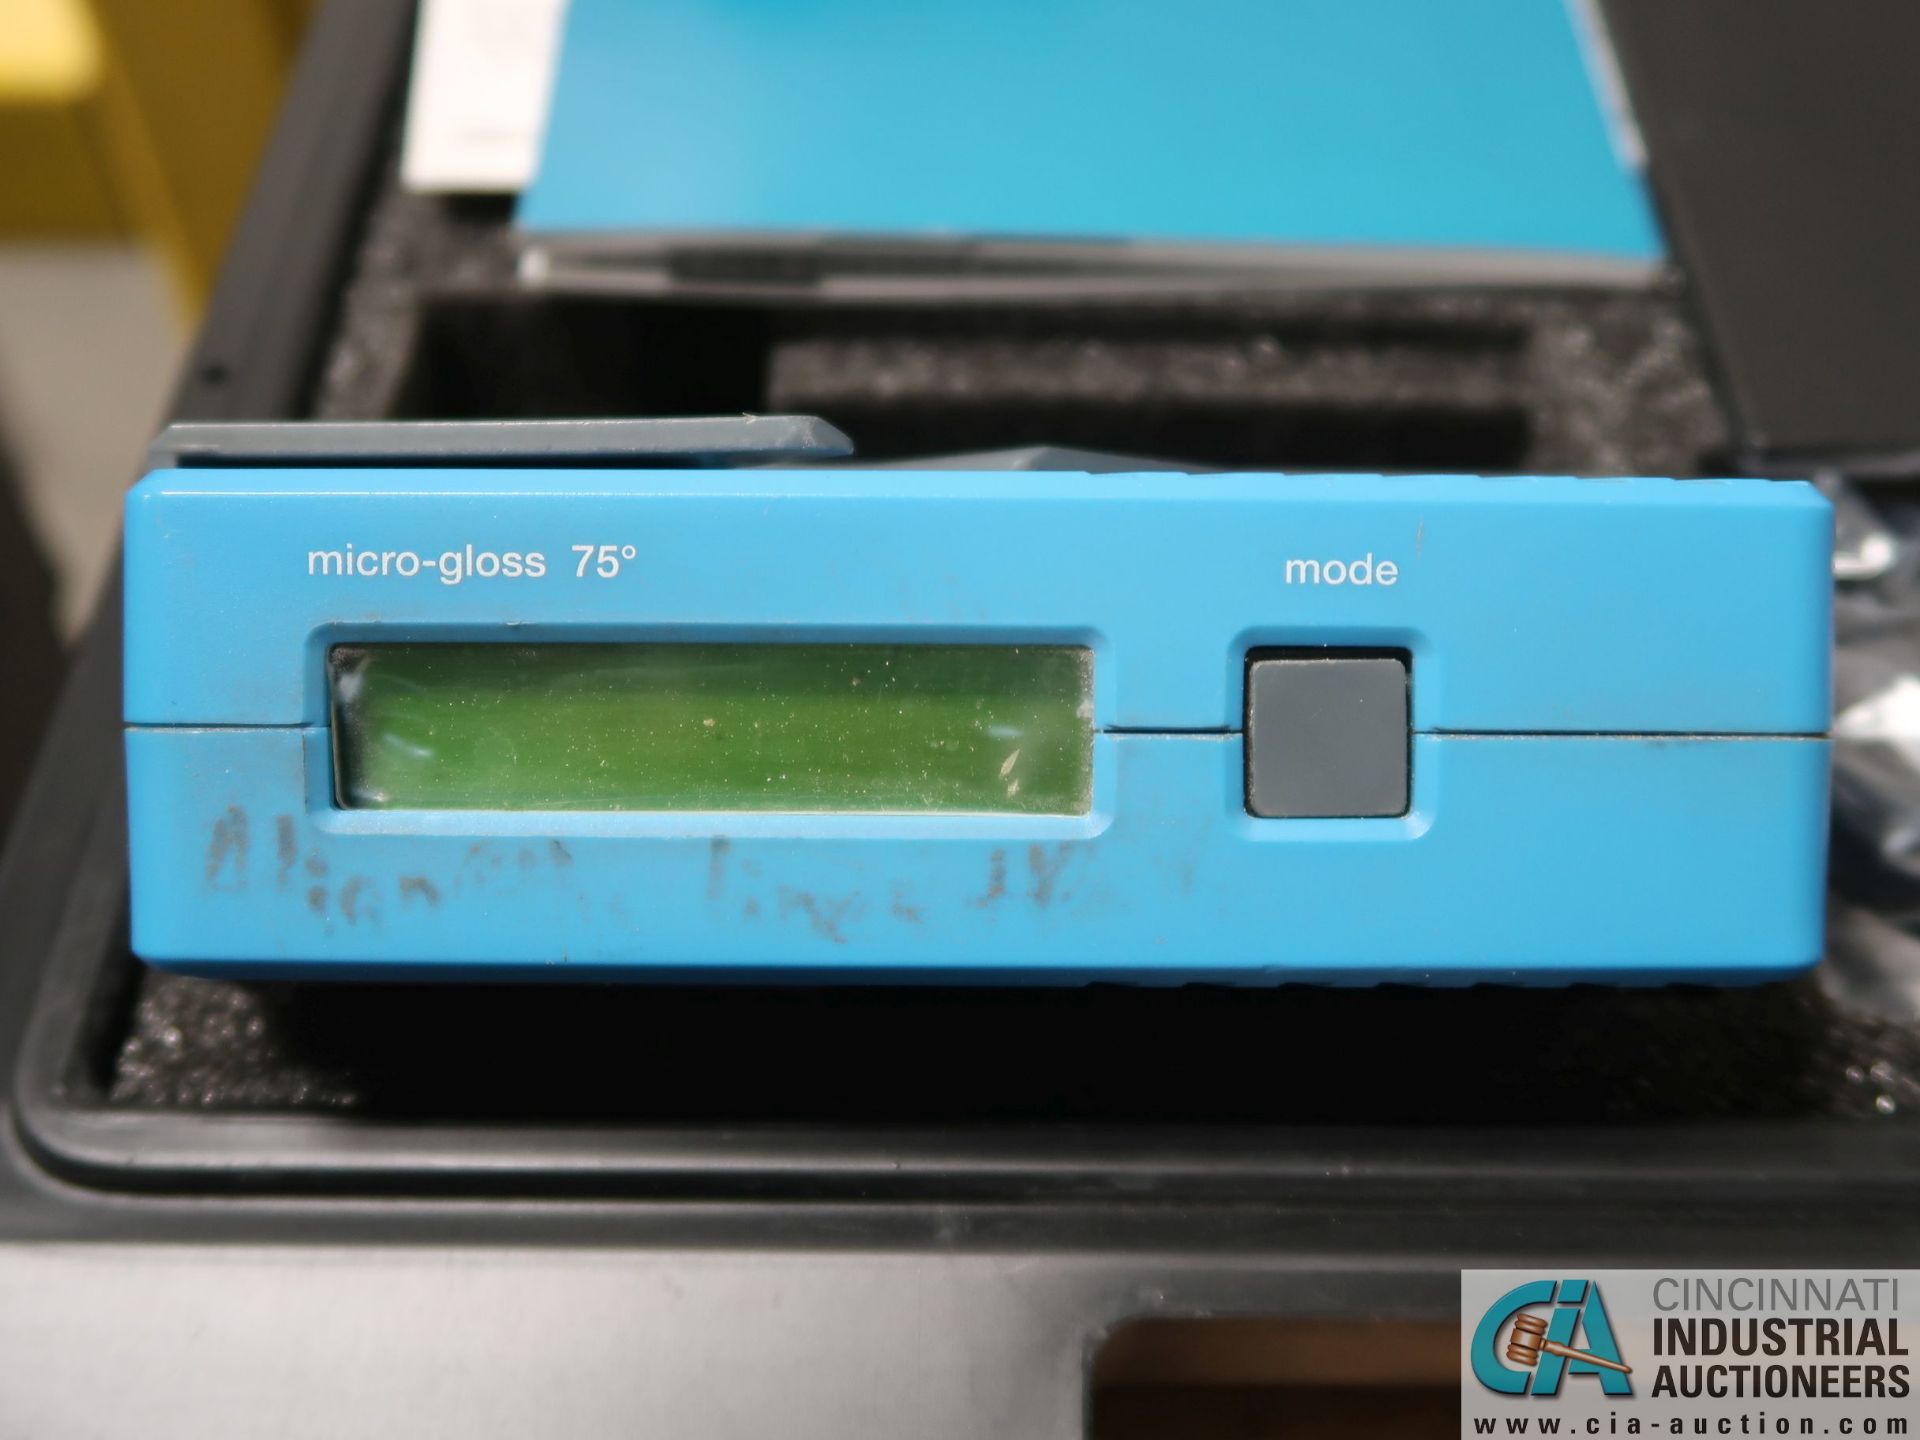 75 DEGREE BYT/GARDNER CAT NO. 4553 MICRO-GLASS REFLECTOMETER - Image 5 of 5